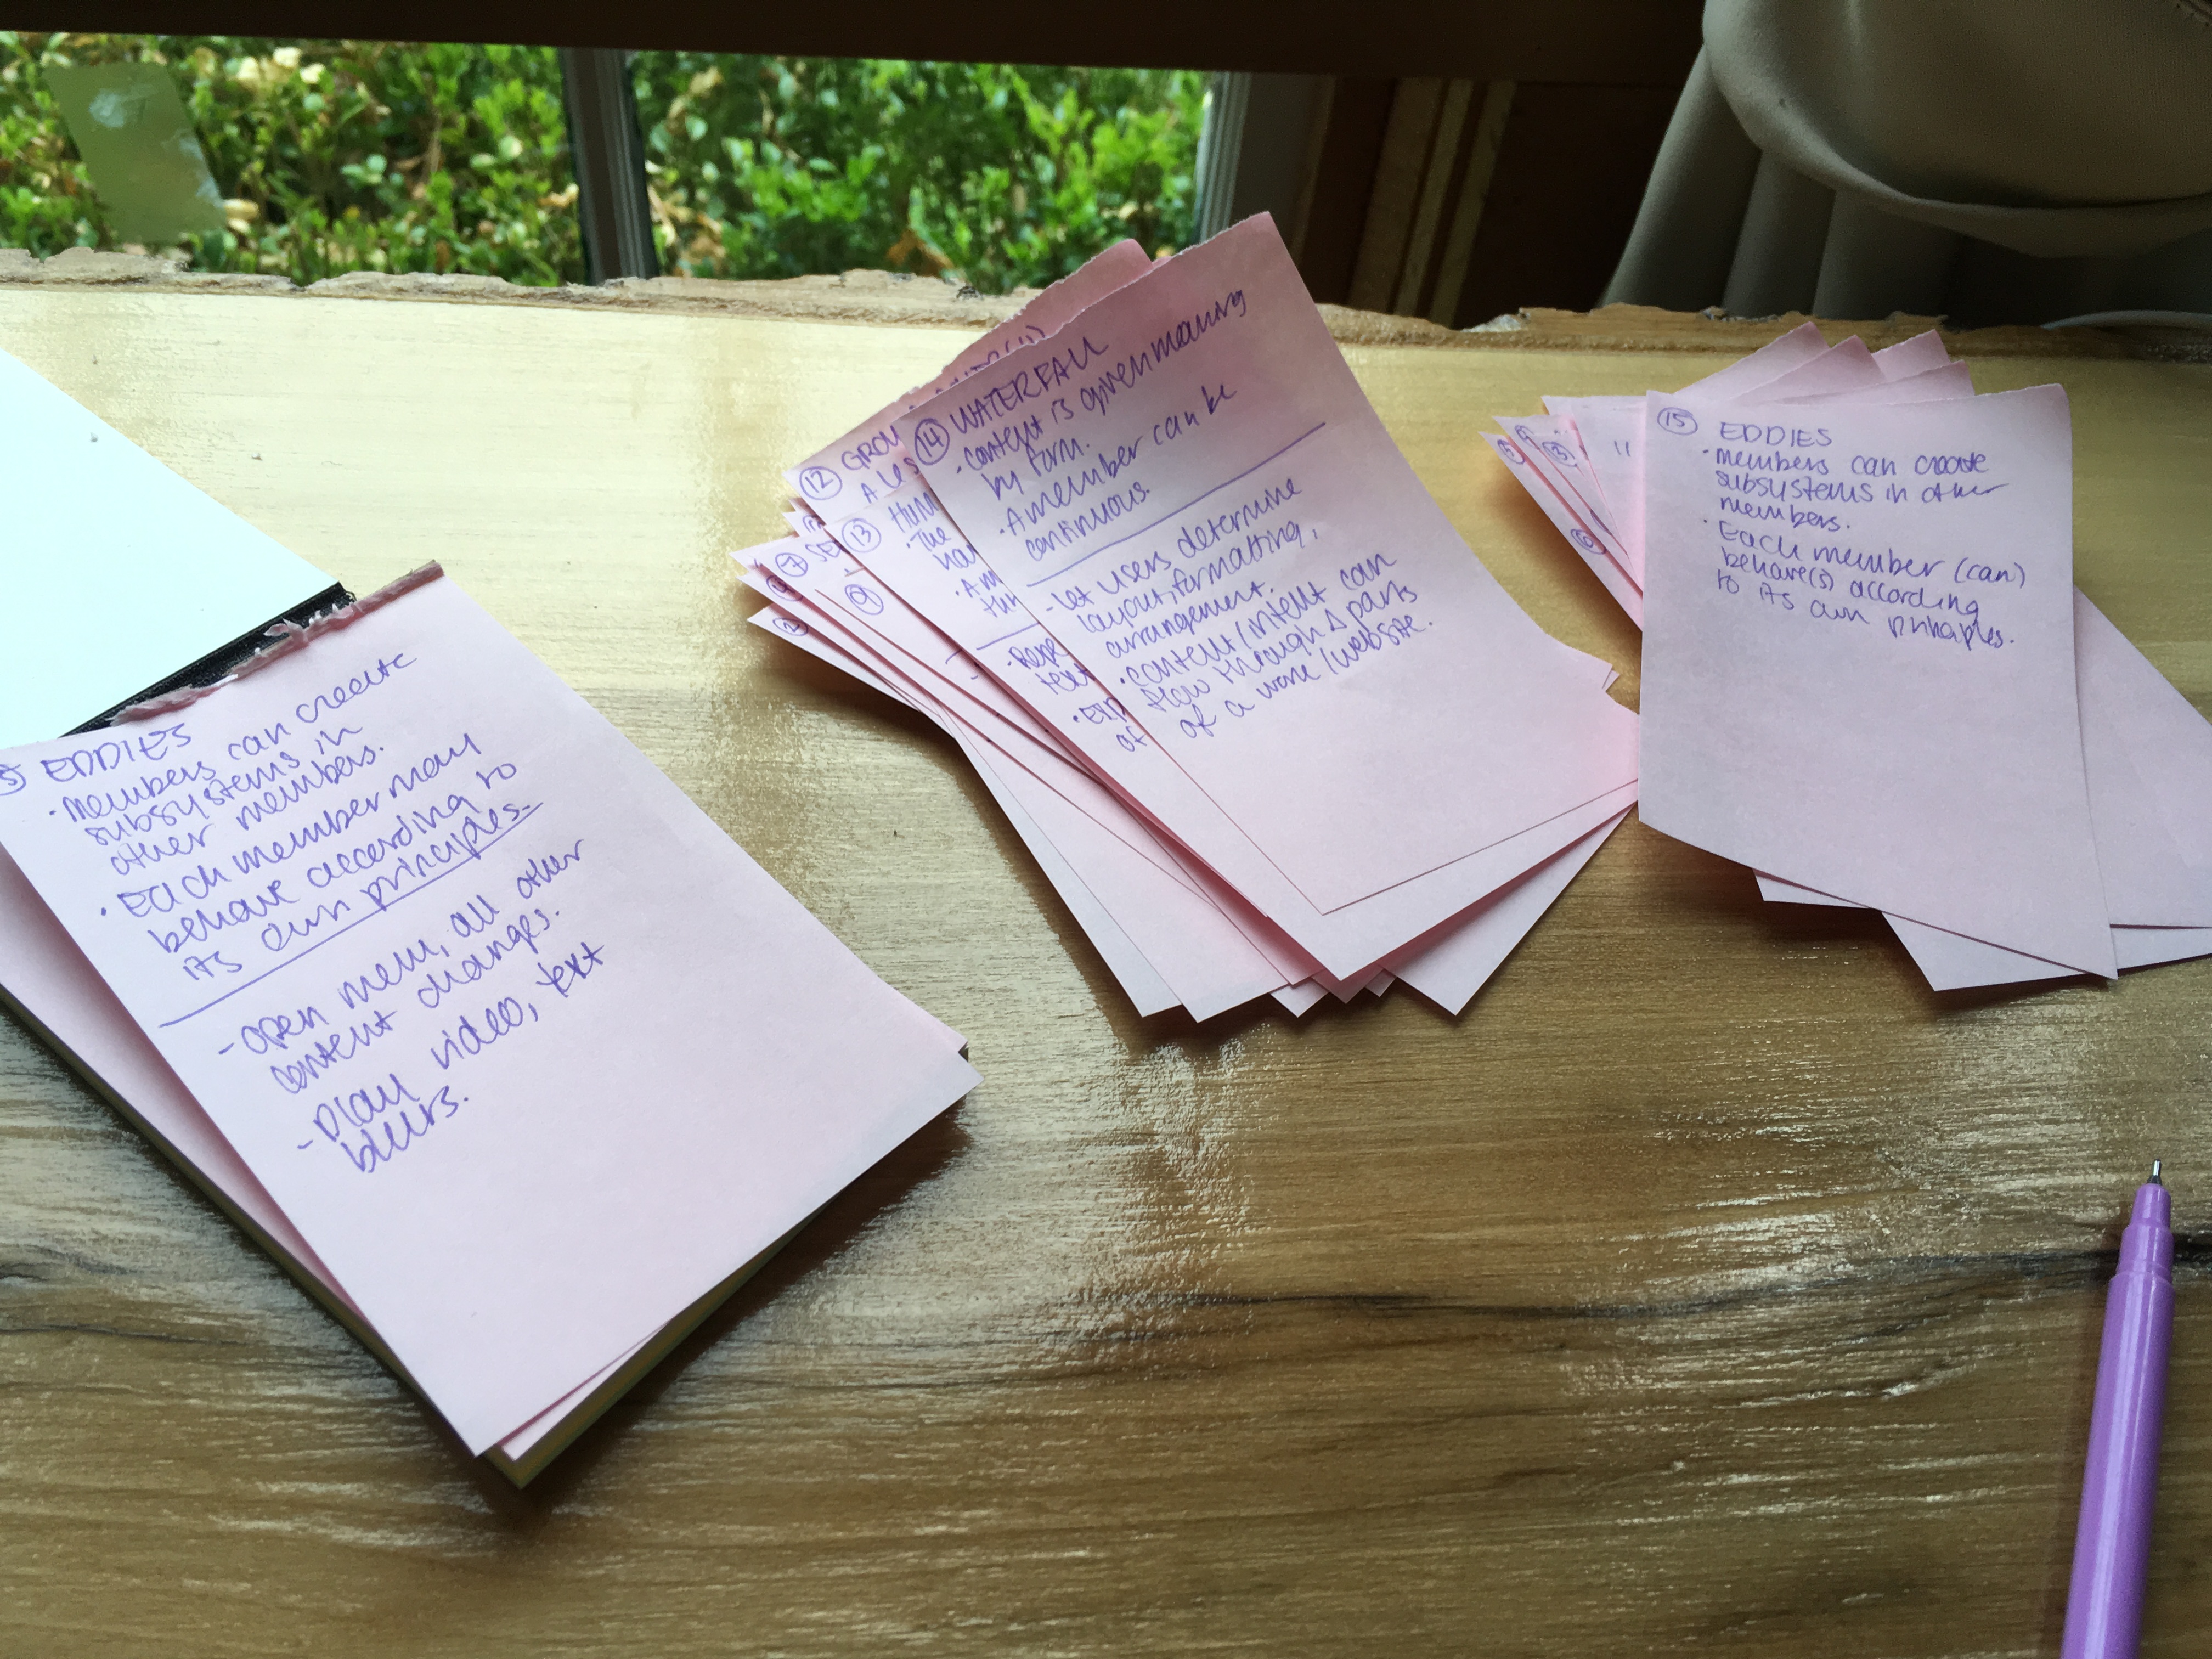 Three thick stacks of pink sticky notes on a wooden table in front of a window.